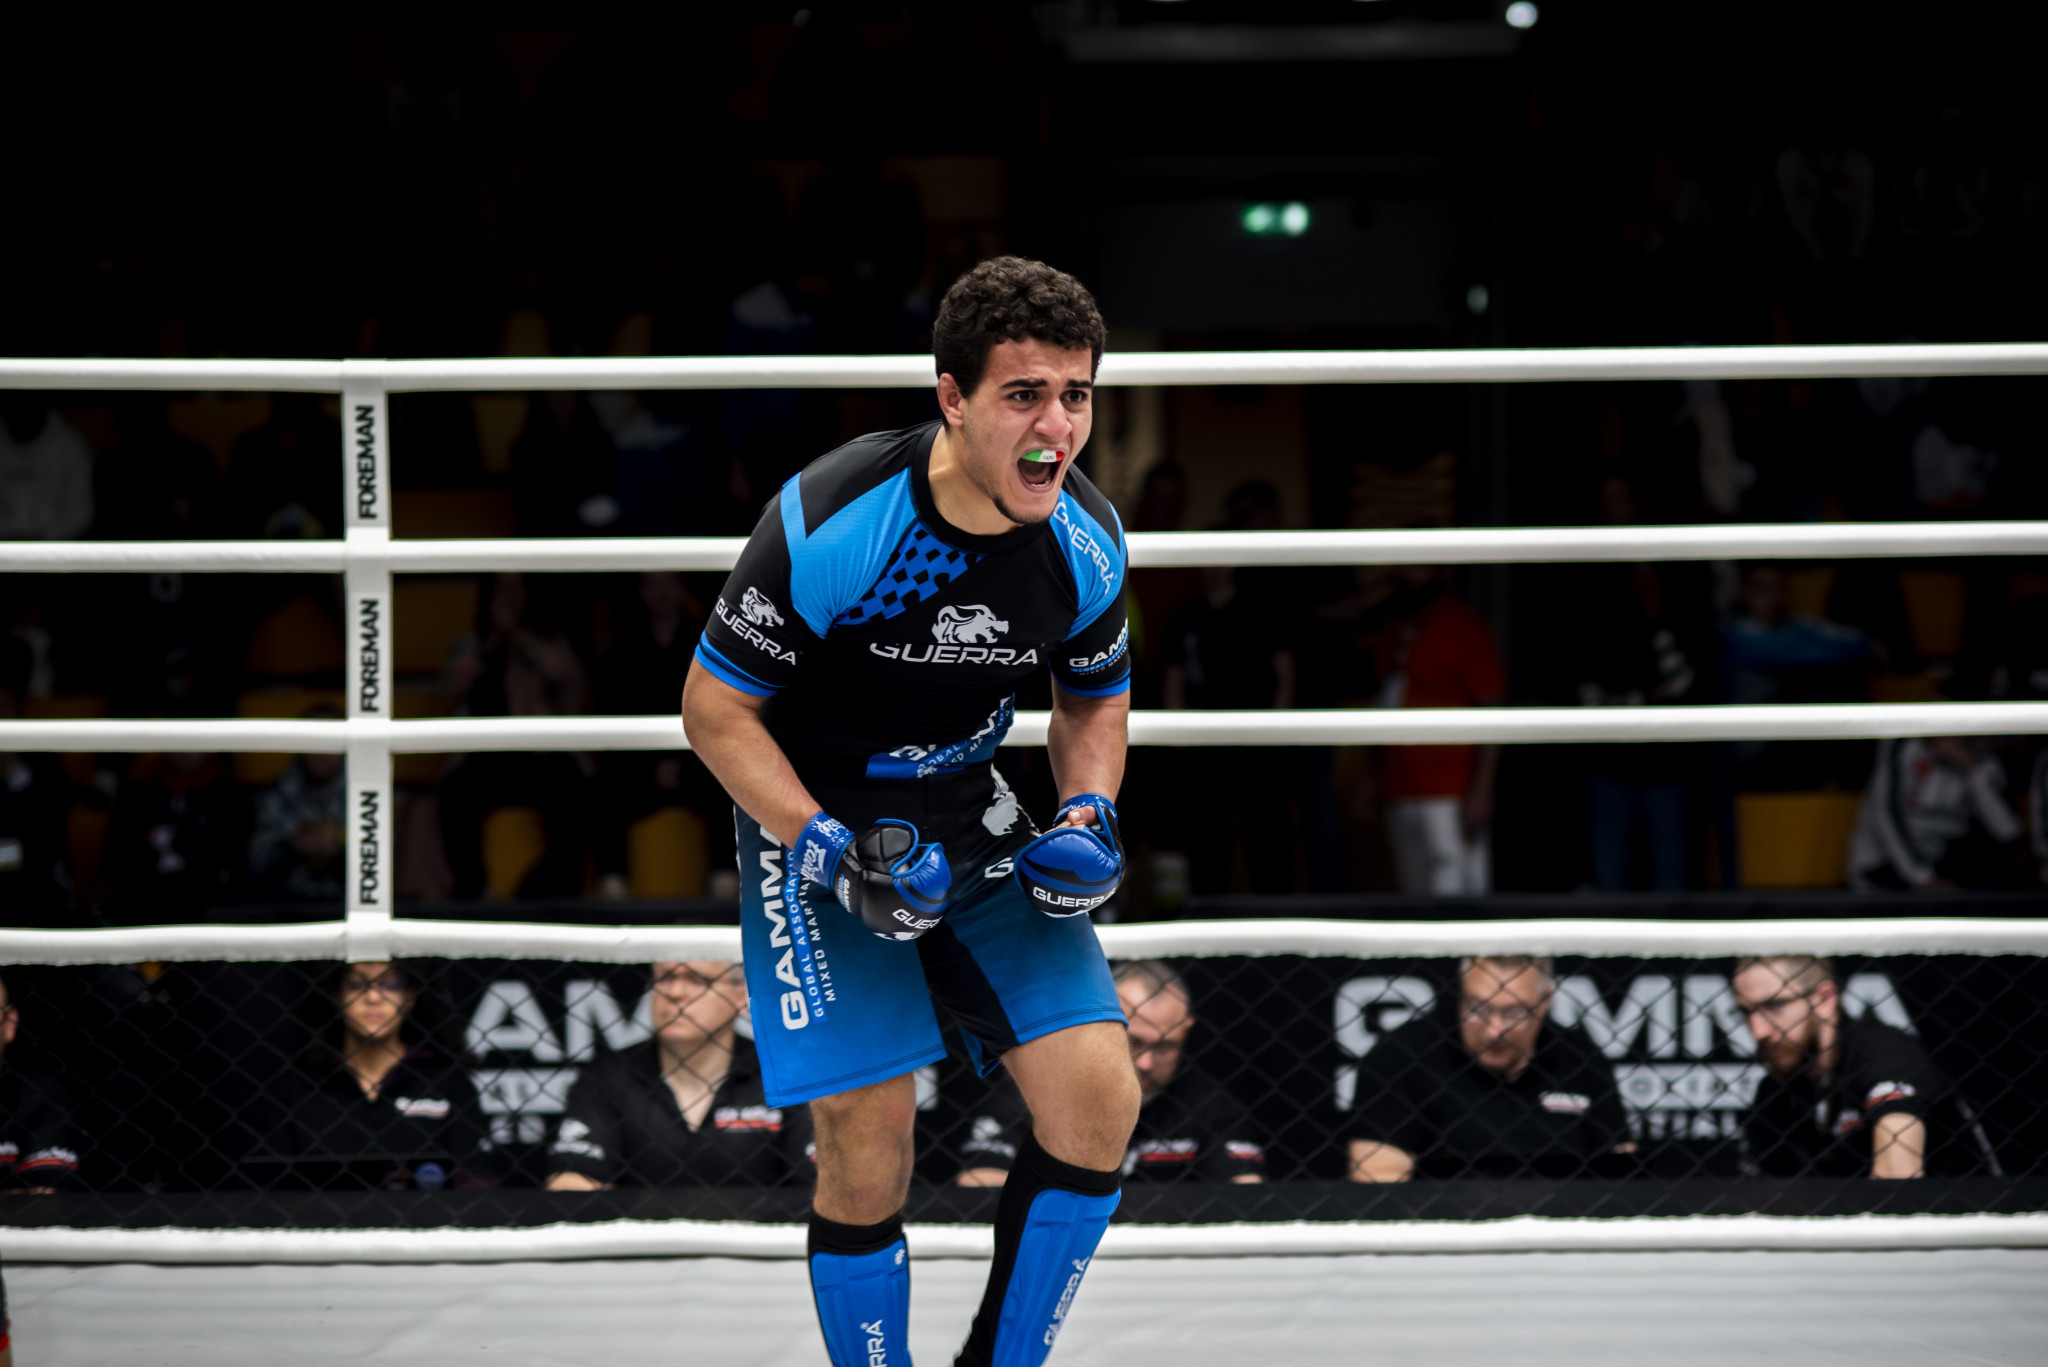 Mehdi Taki became Italy's first-ever GAMMA world champion following his triumph over Nail Azizov of Azerbaijan in the men's under-83.9kg category ©GAMMA